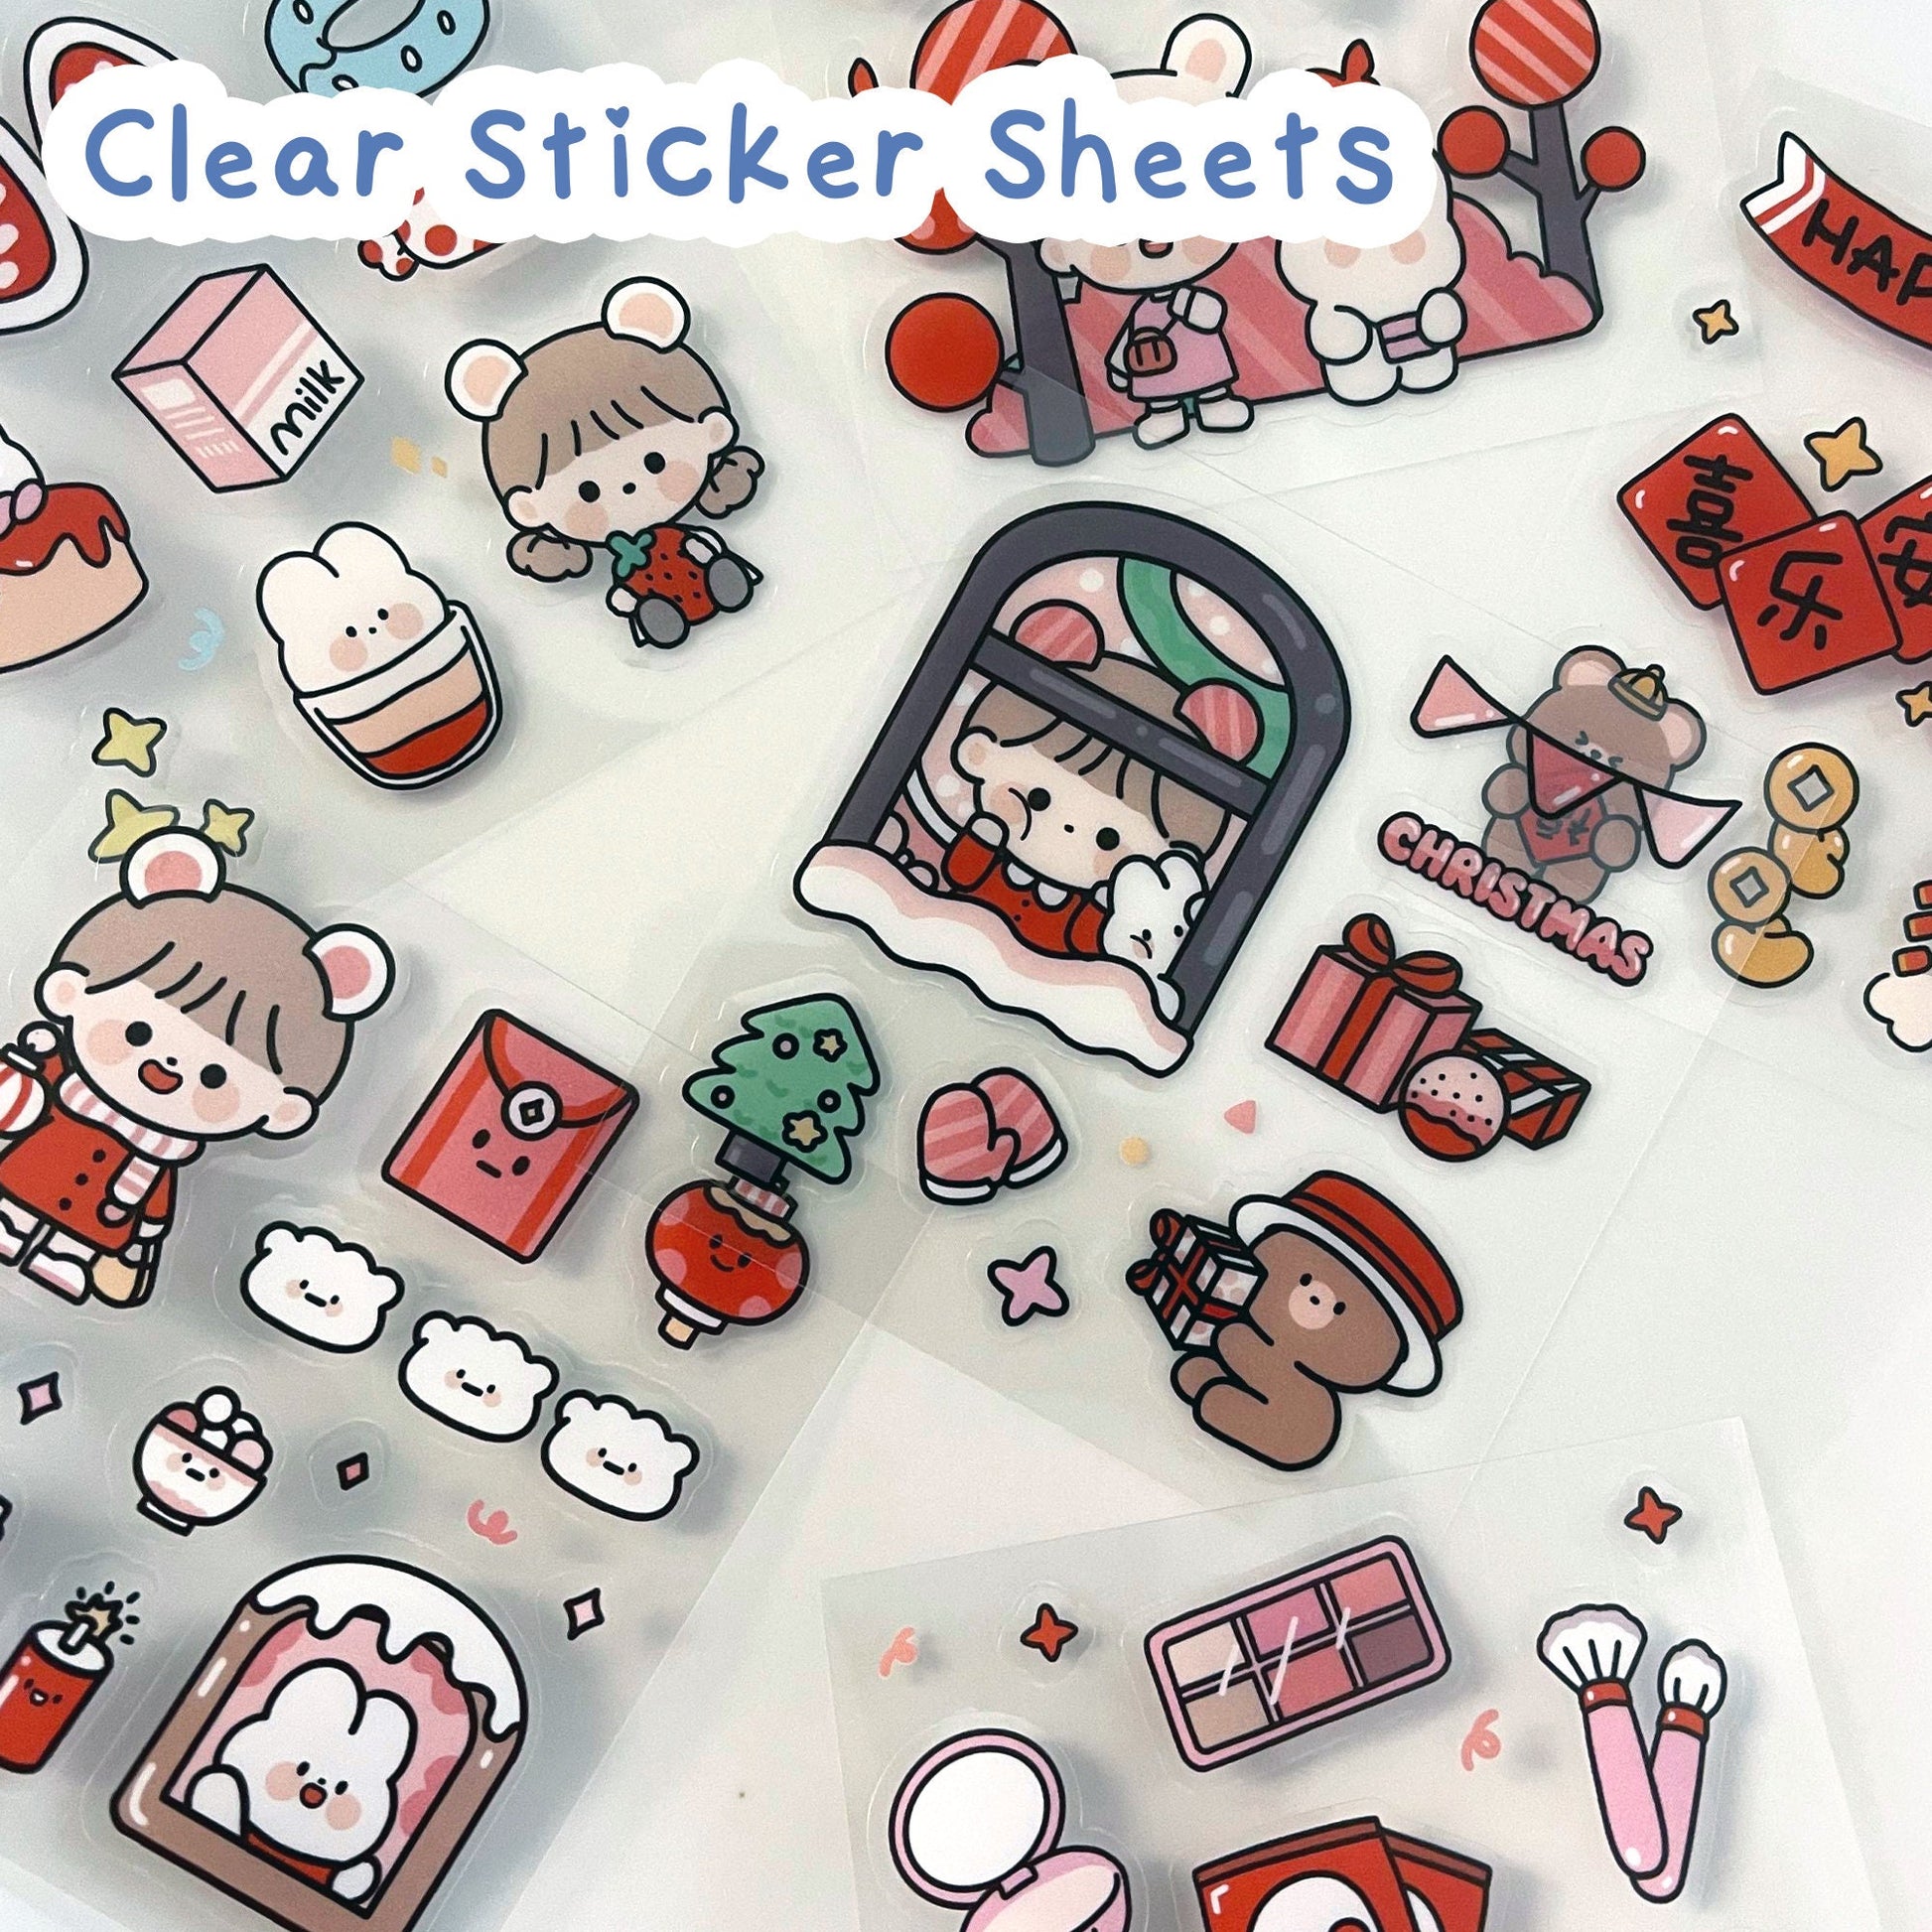 Mystery Sticker Two Pack Two Random Stickers for the Price of 